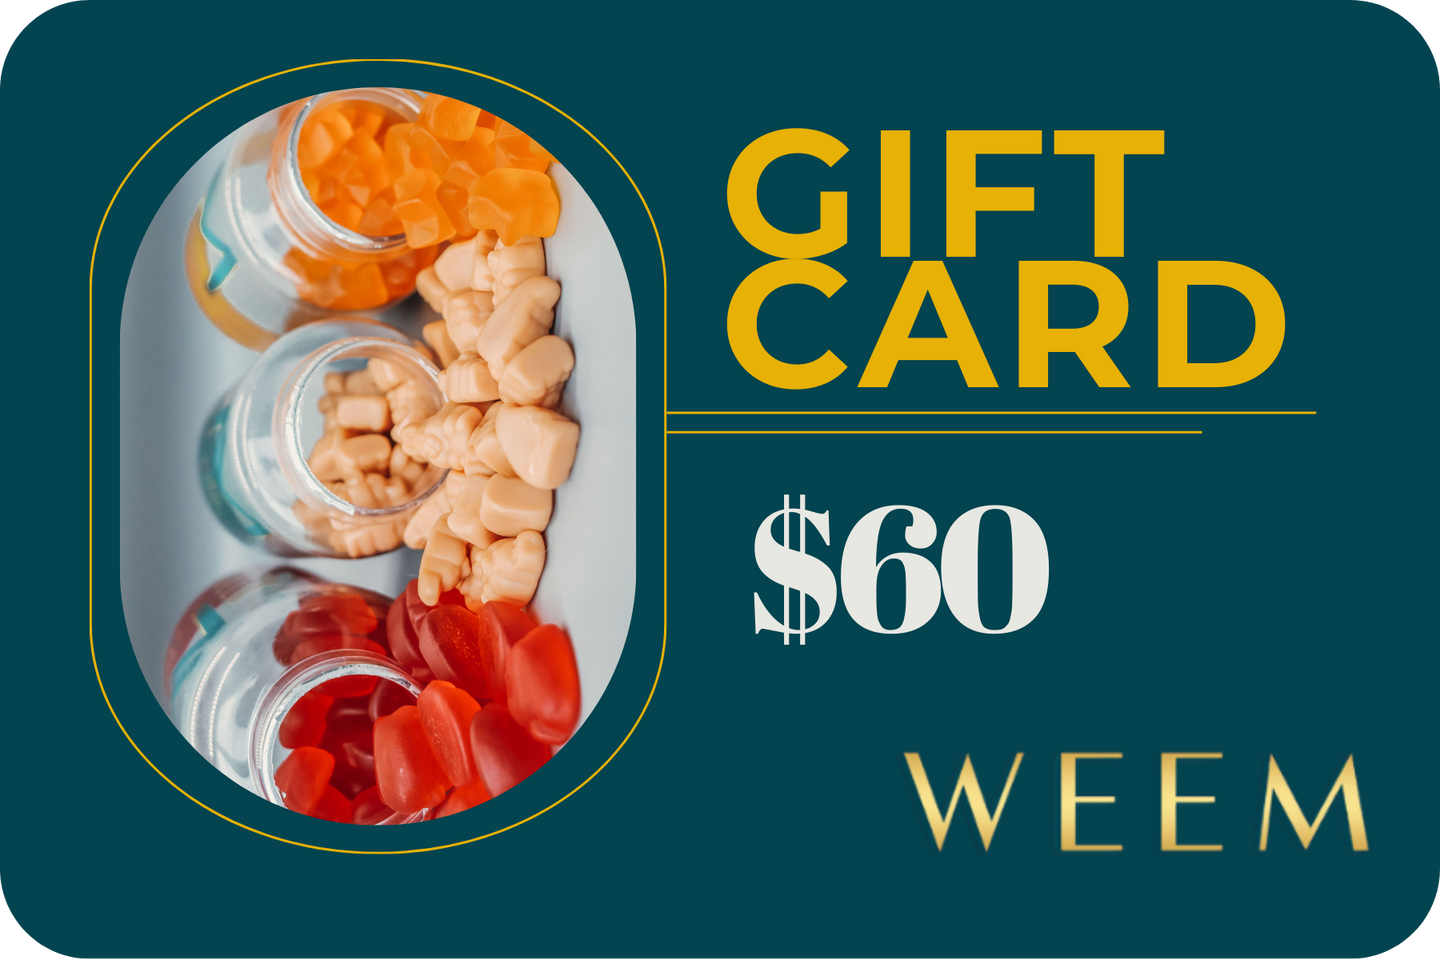 Load image into Gallery viewer, WEEM $60 Gift Card
